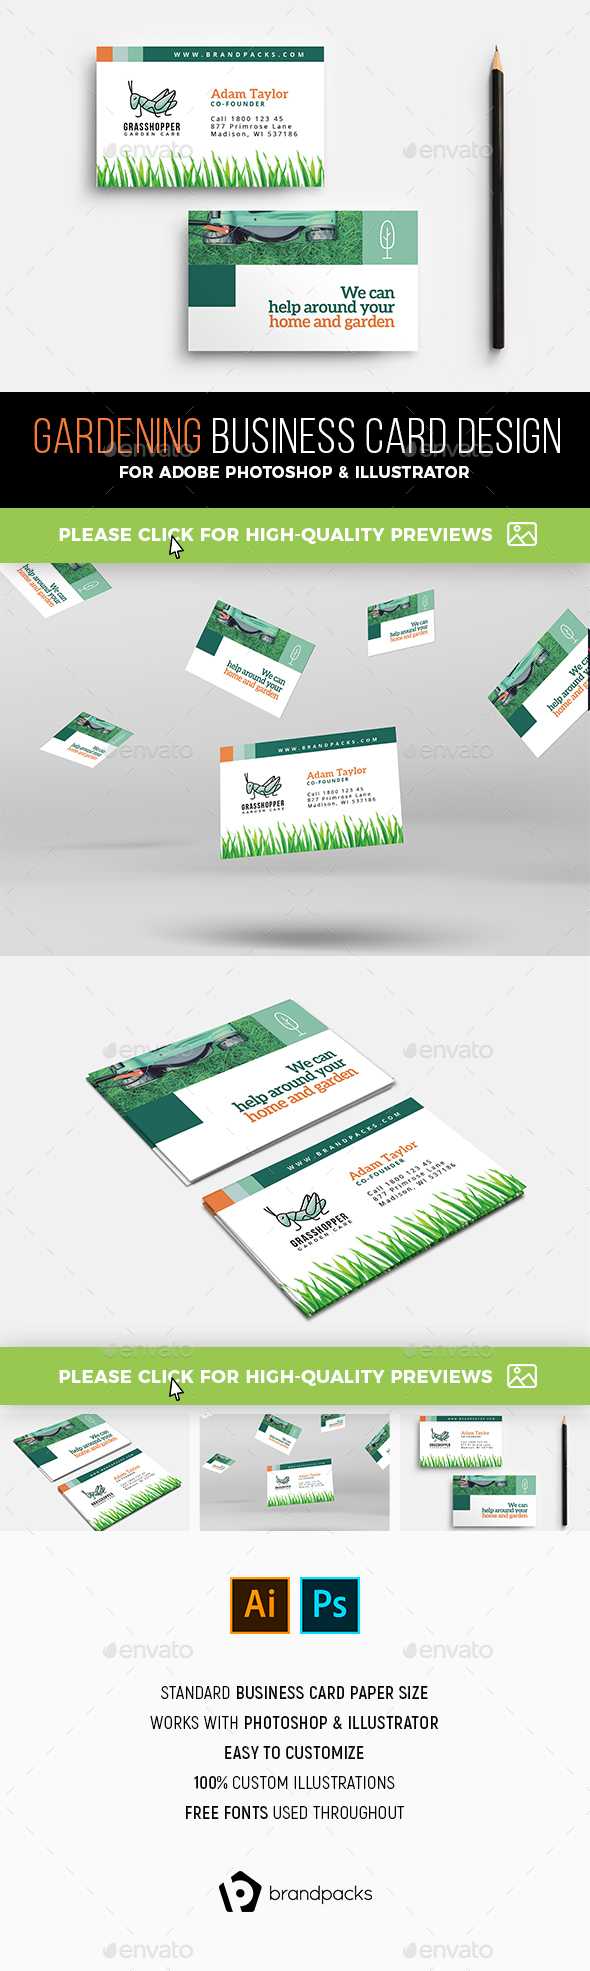 Gardening Business Card Templates & Designs From Graphicriver Throughout Gardening Business Cards Templates